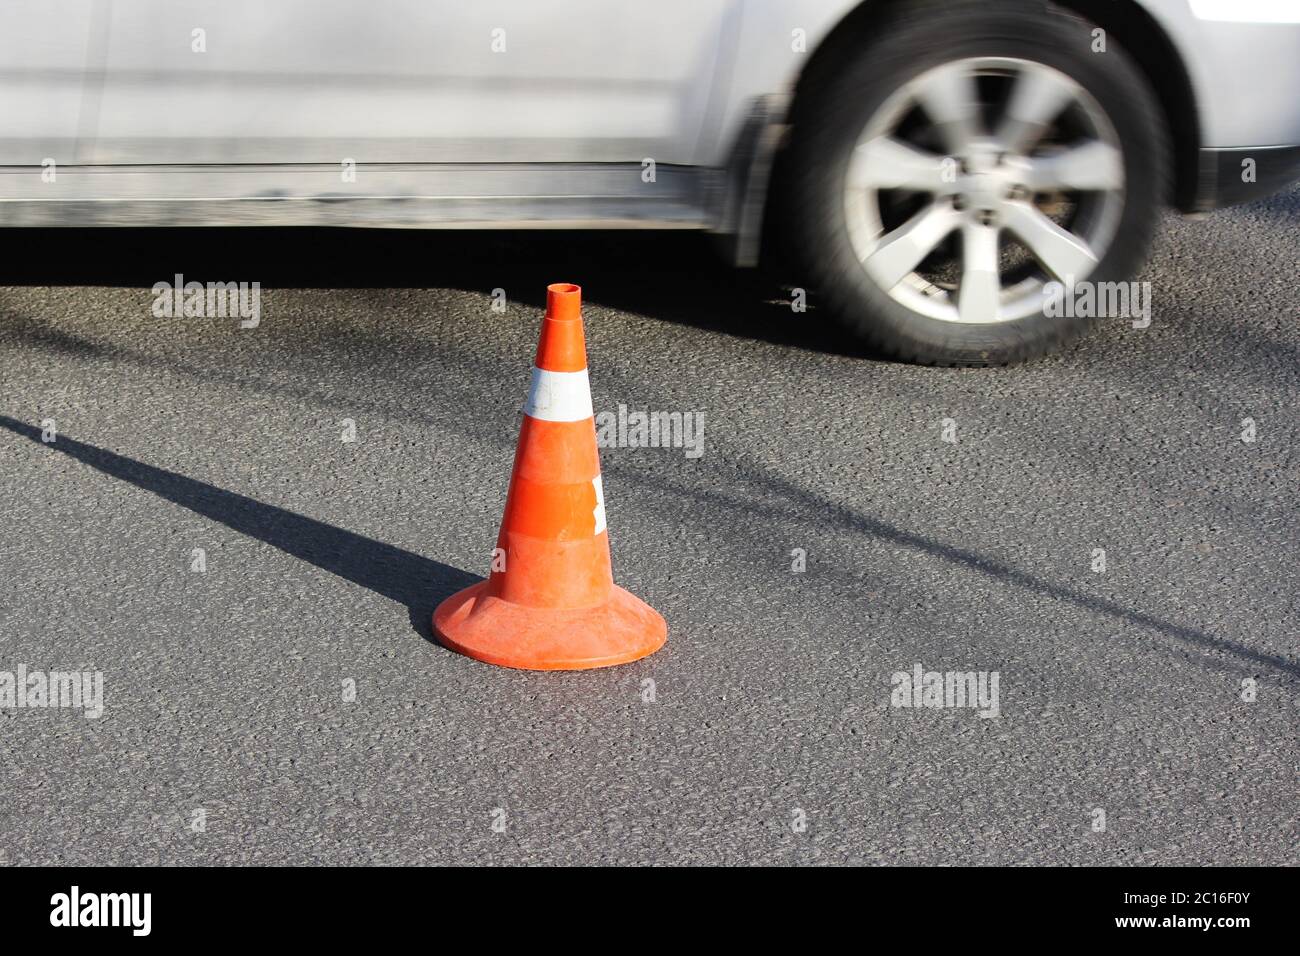 plastic signaling traffic cone encloses a place in the parking lot for trucks. Stock Photo